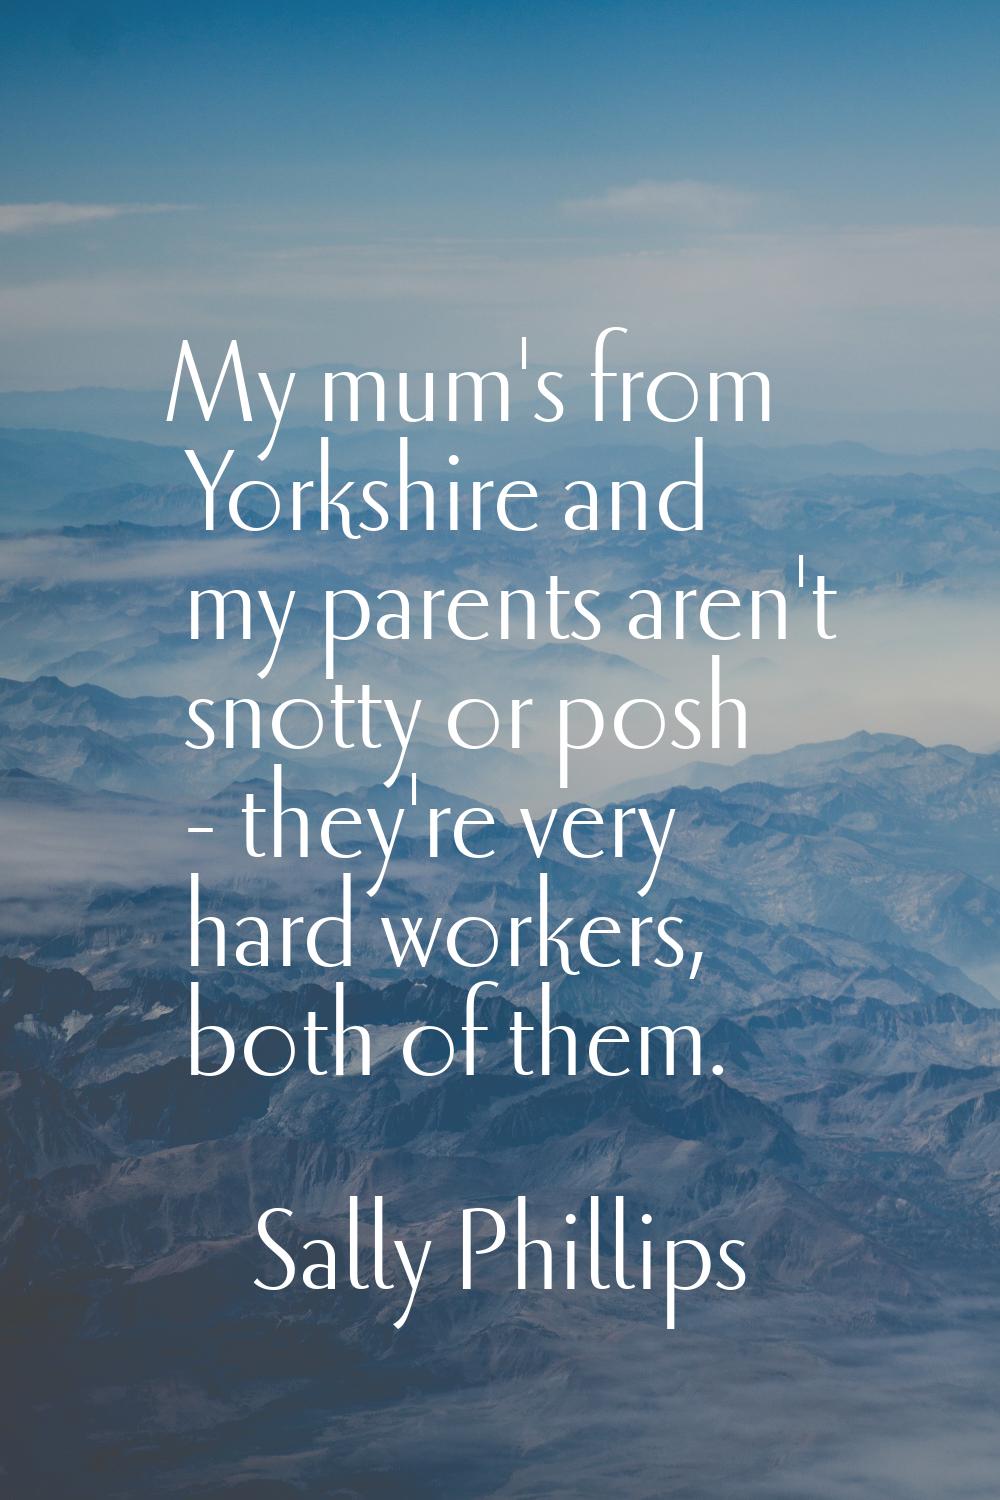 My mum's from Yorkshire and my parents aren't snotty or posh - they're very hard workers, both of t